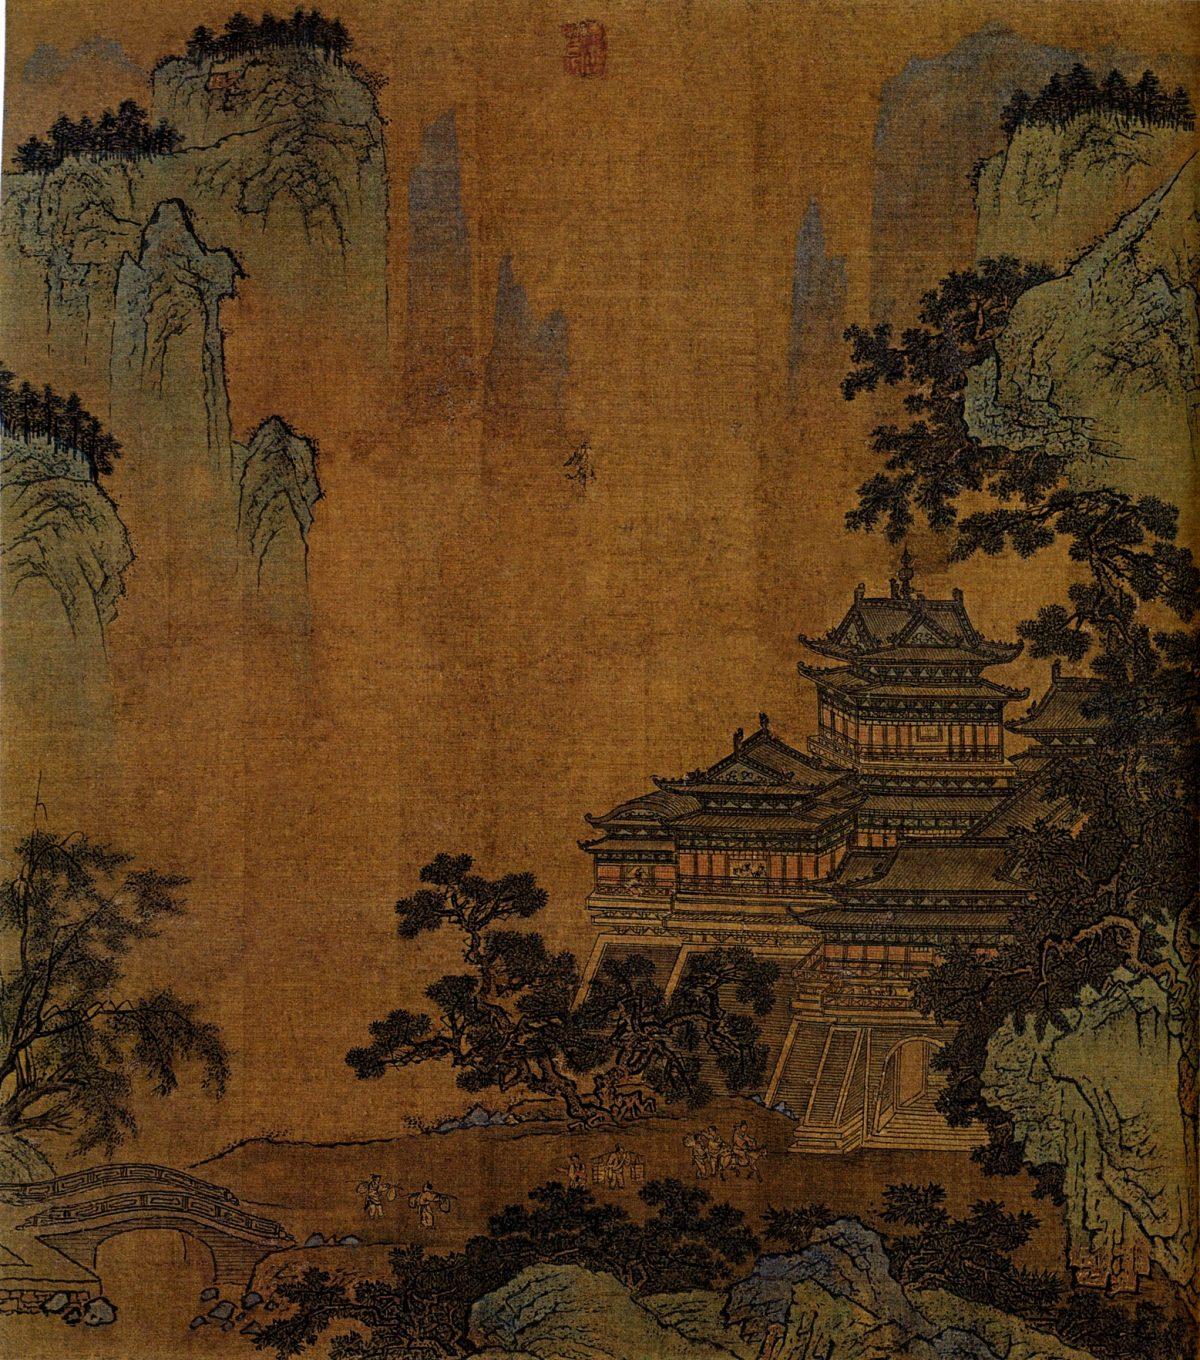 “The Yellow Crane Tower” by an anonymous painter of the Ming Dynasty. (Public Domain)